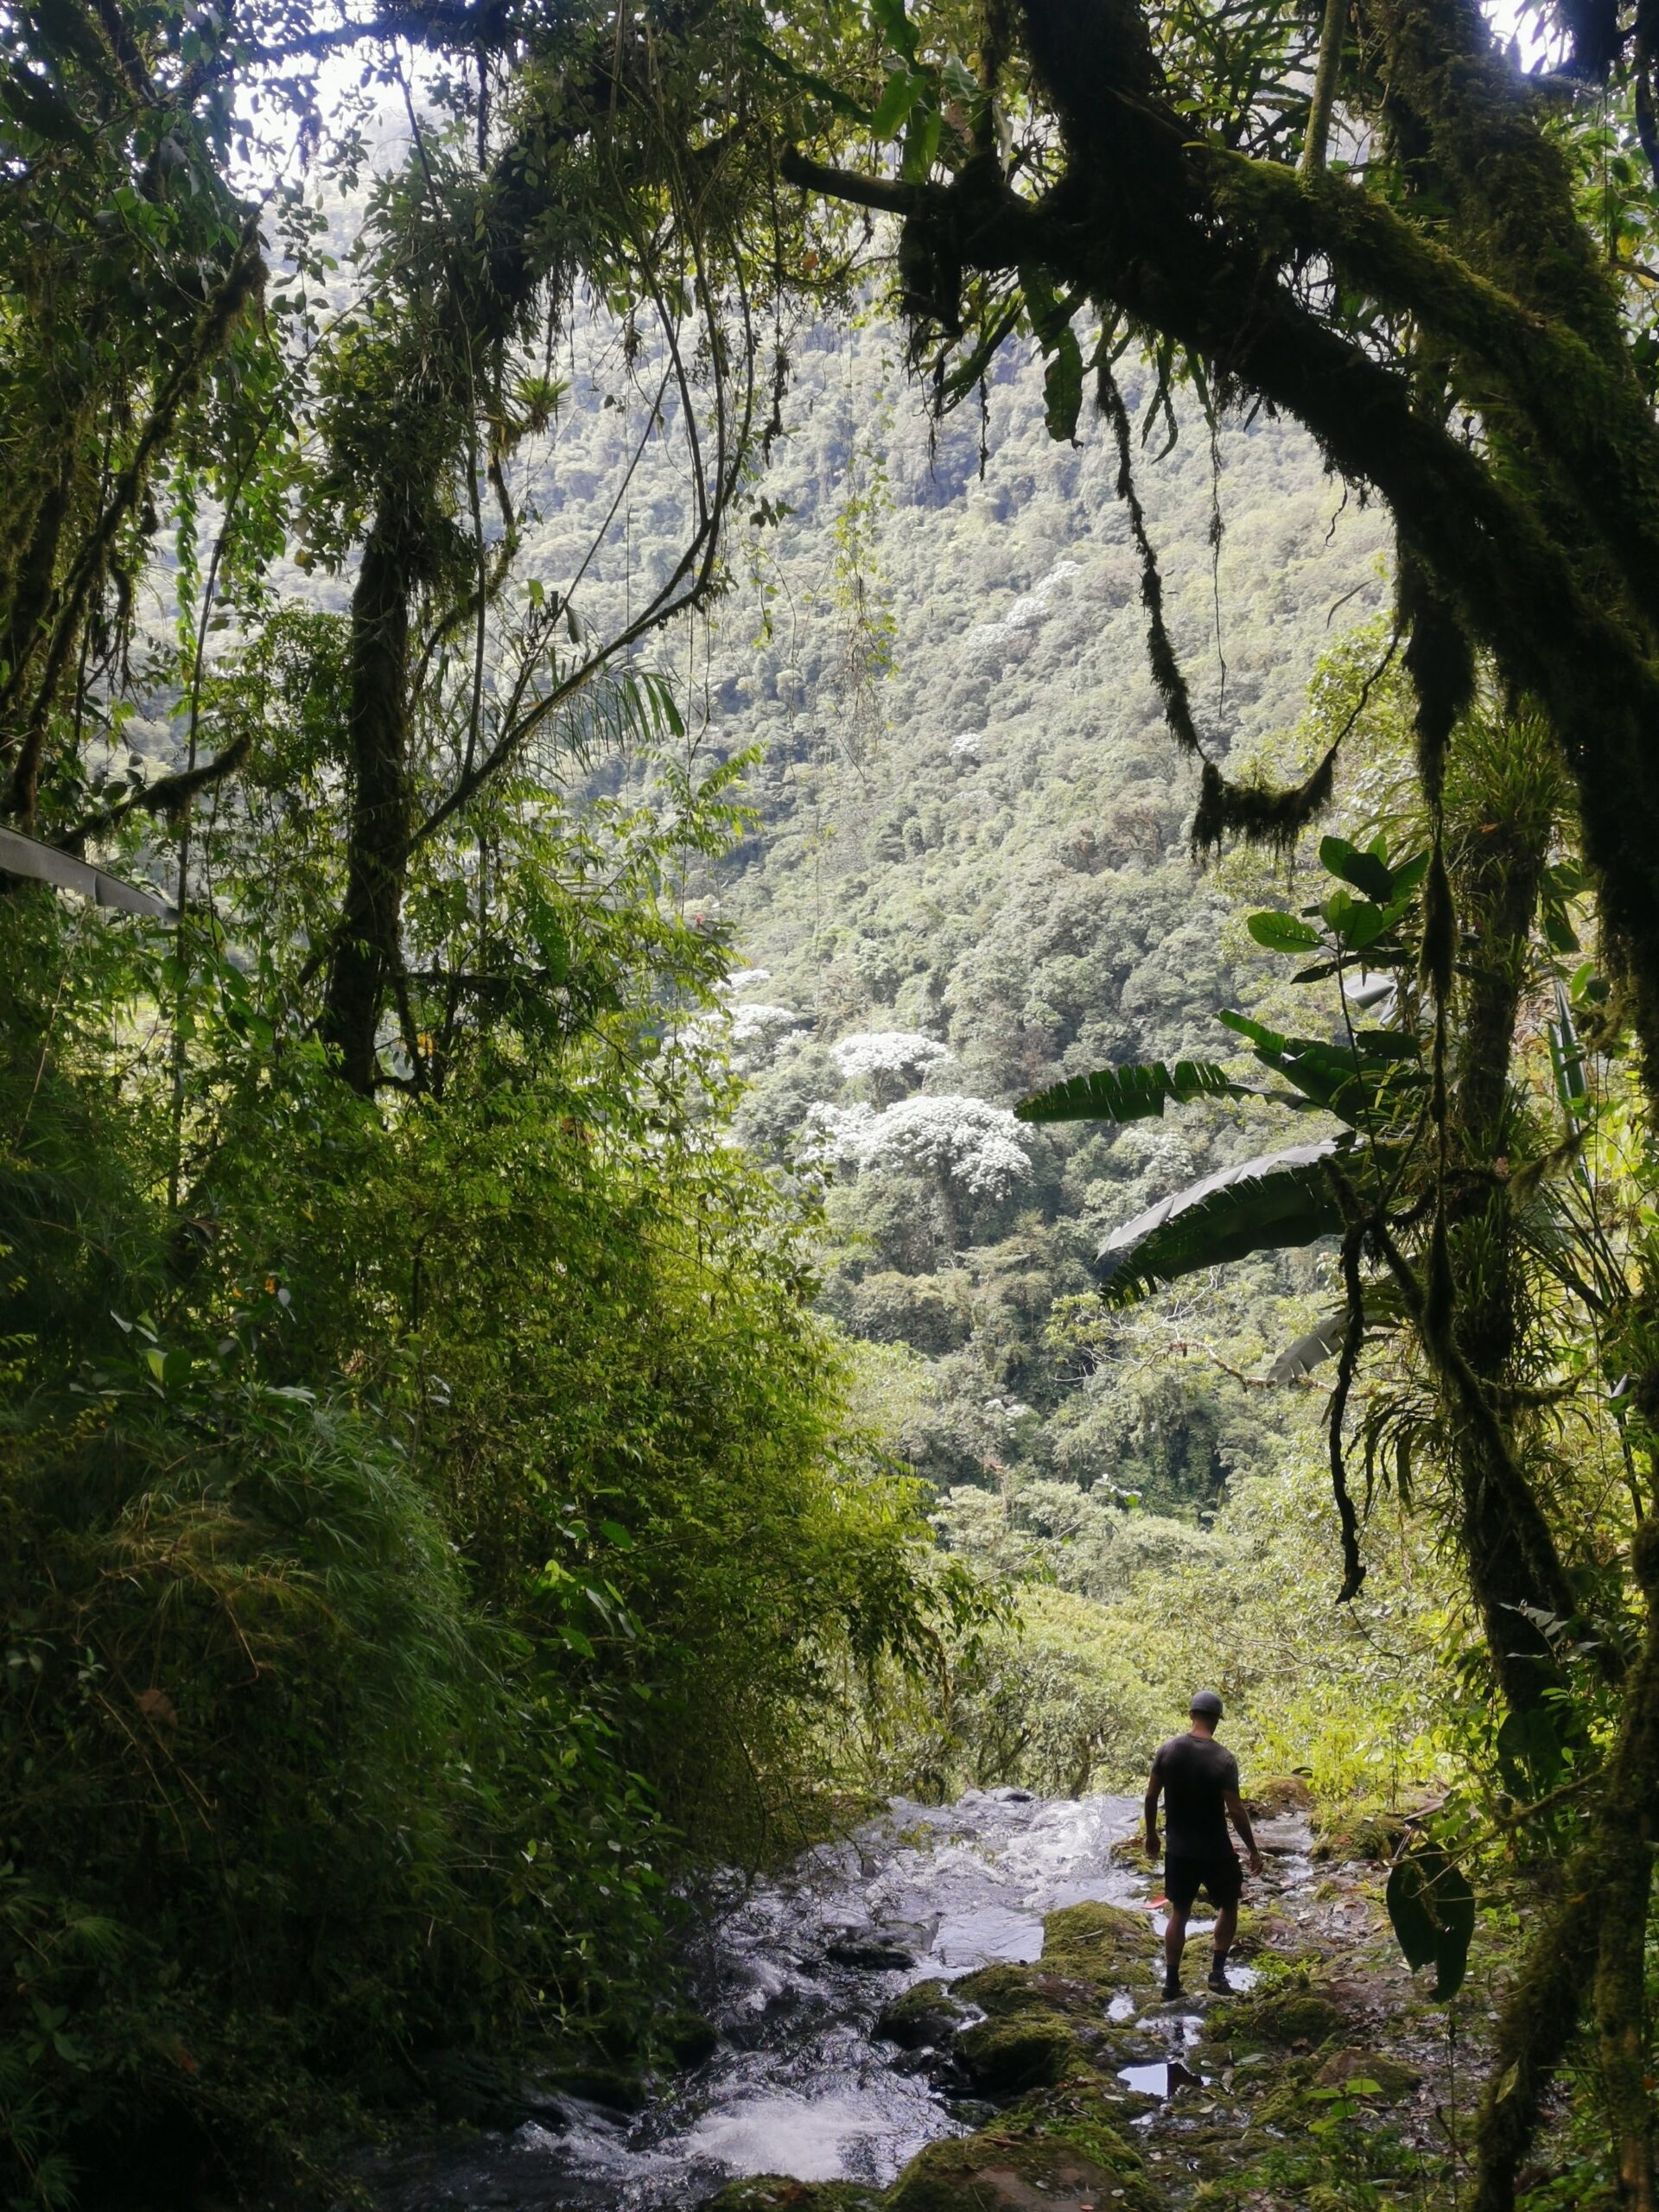 A man walking next to a stream that is flowing off a cliff surrounded by jungle